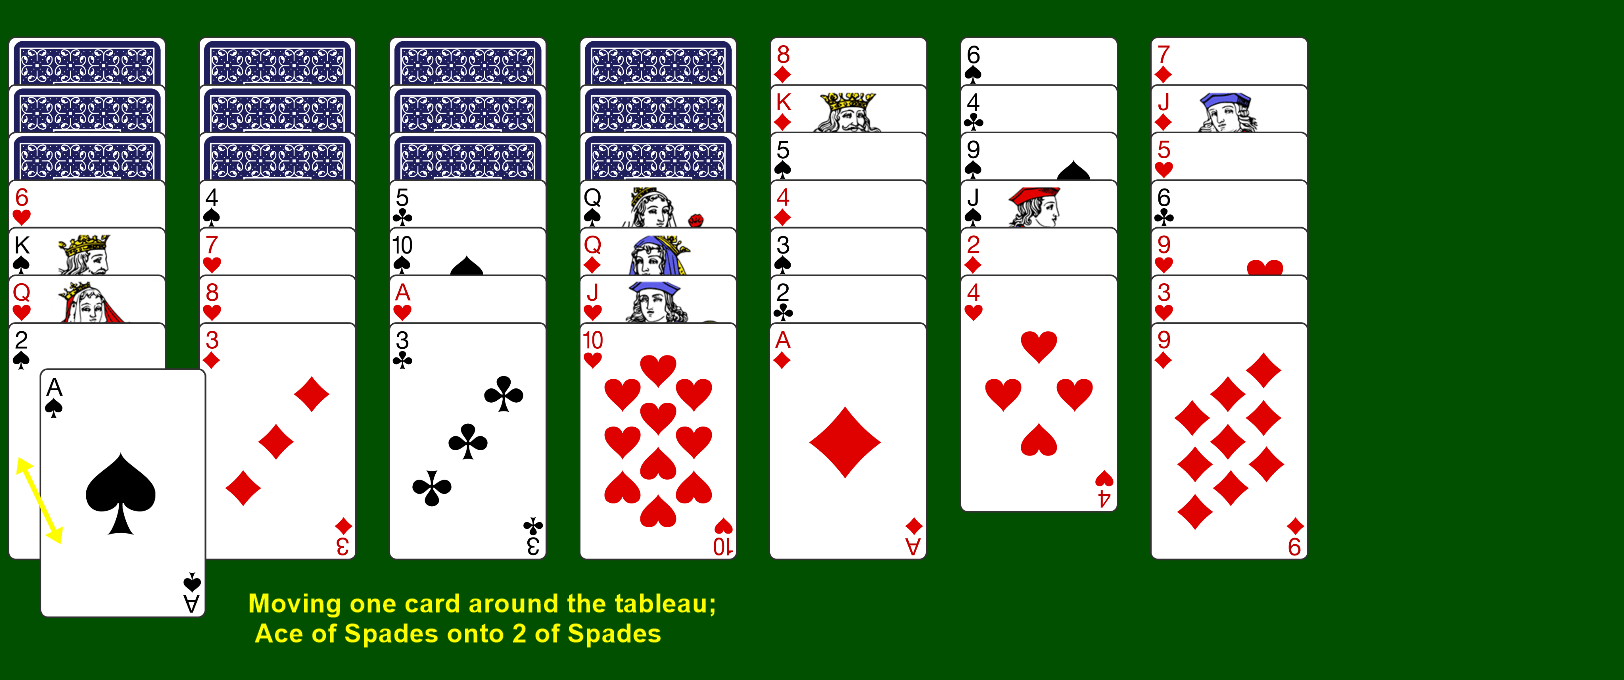 scorpion solitaire just solitaire